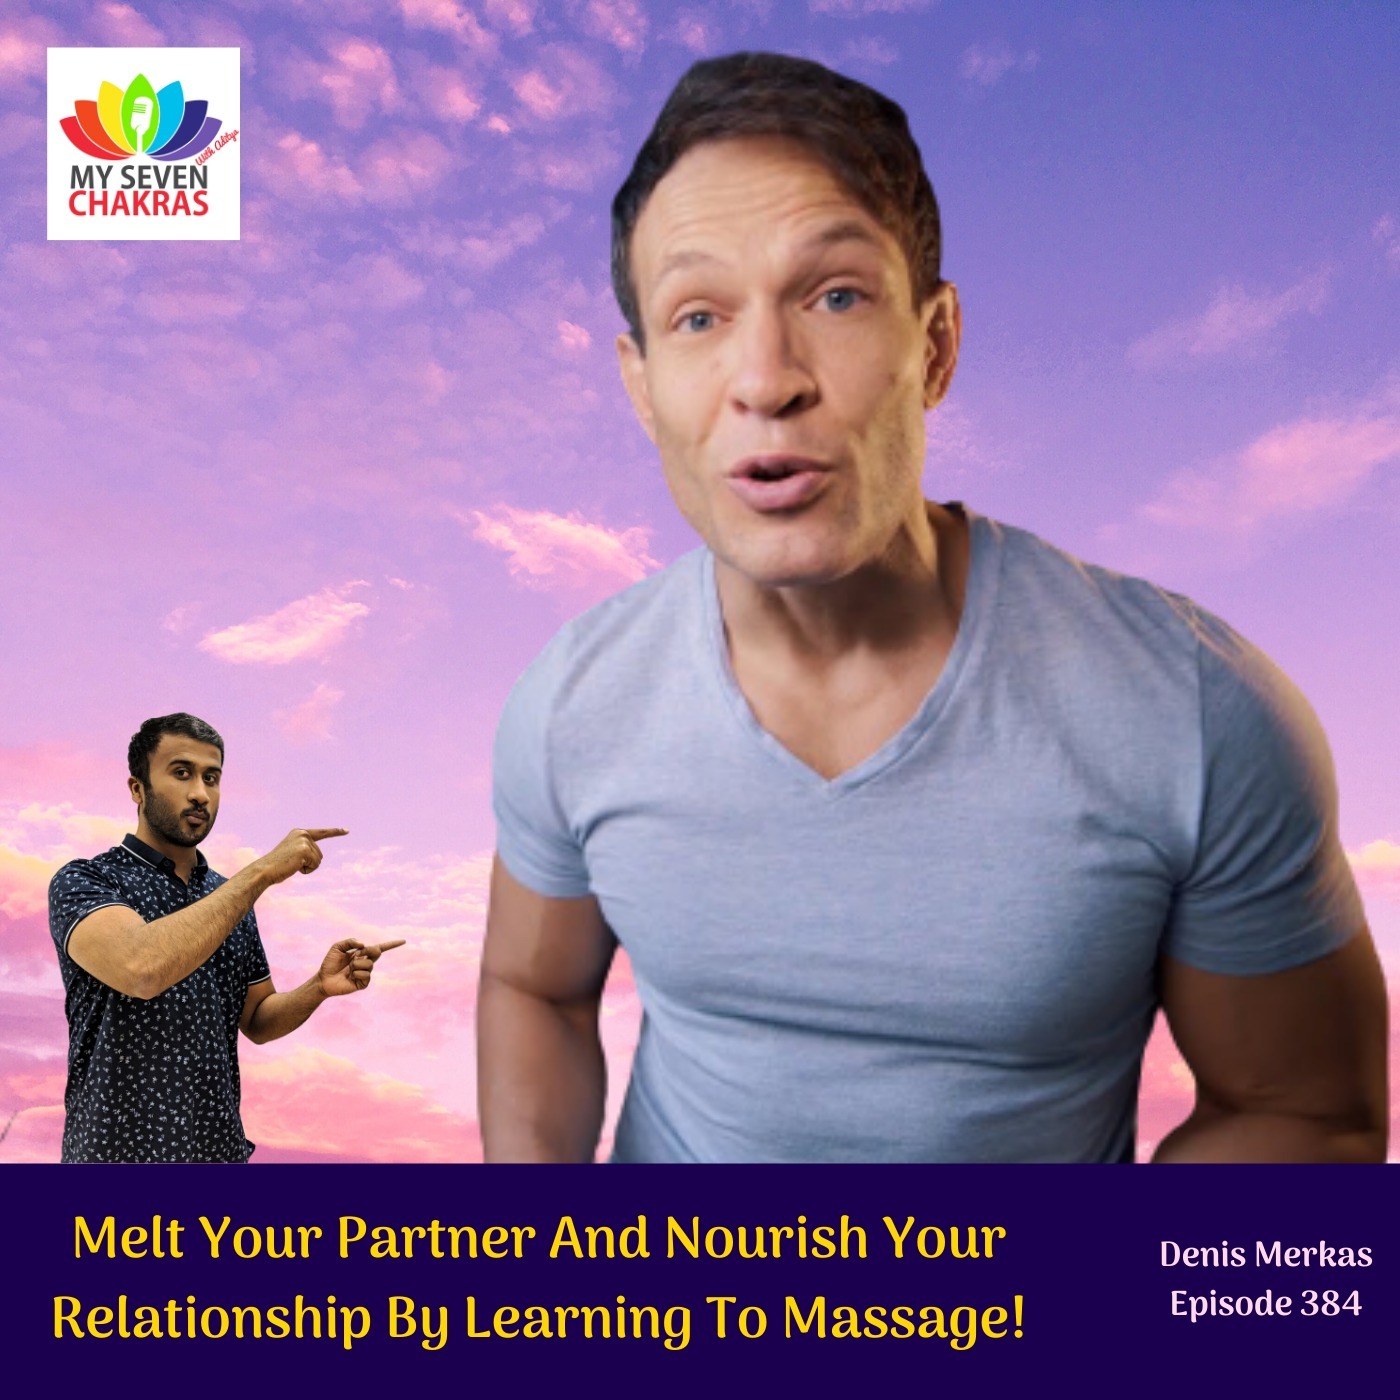 Melt Your Partner & Nourish Your Relationship By Learning To Massage With Denis Merkas